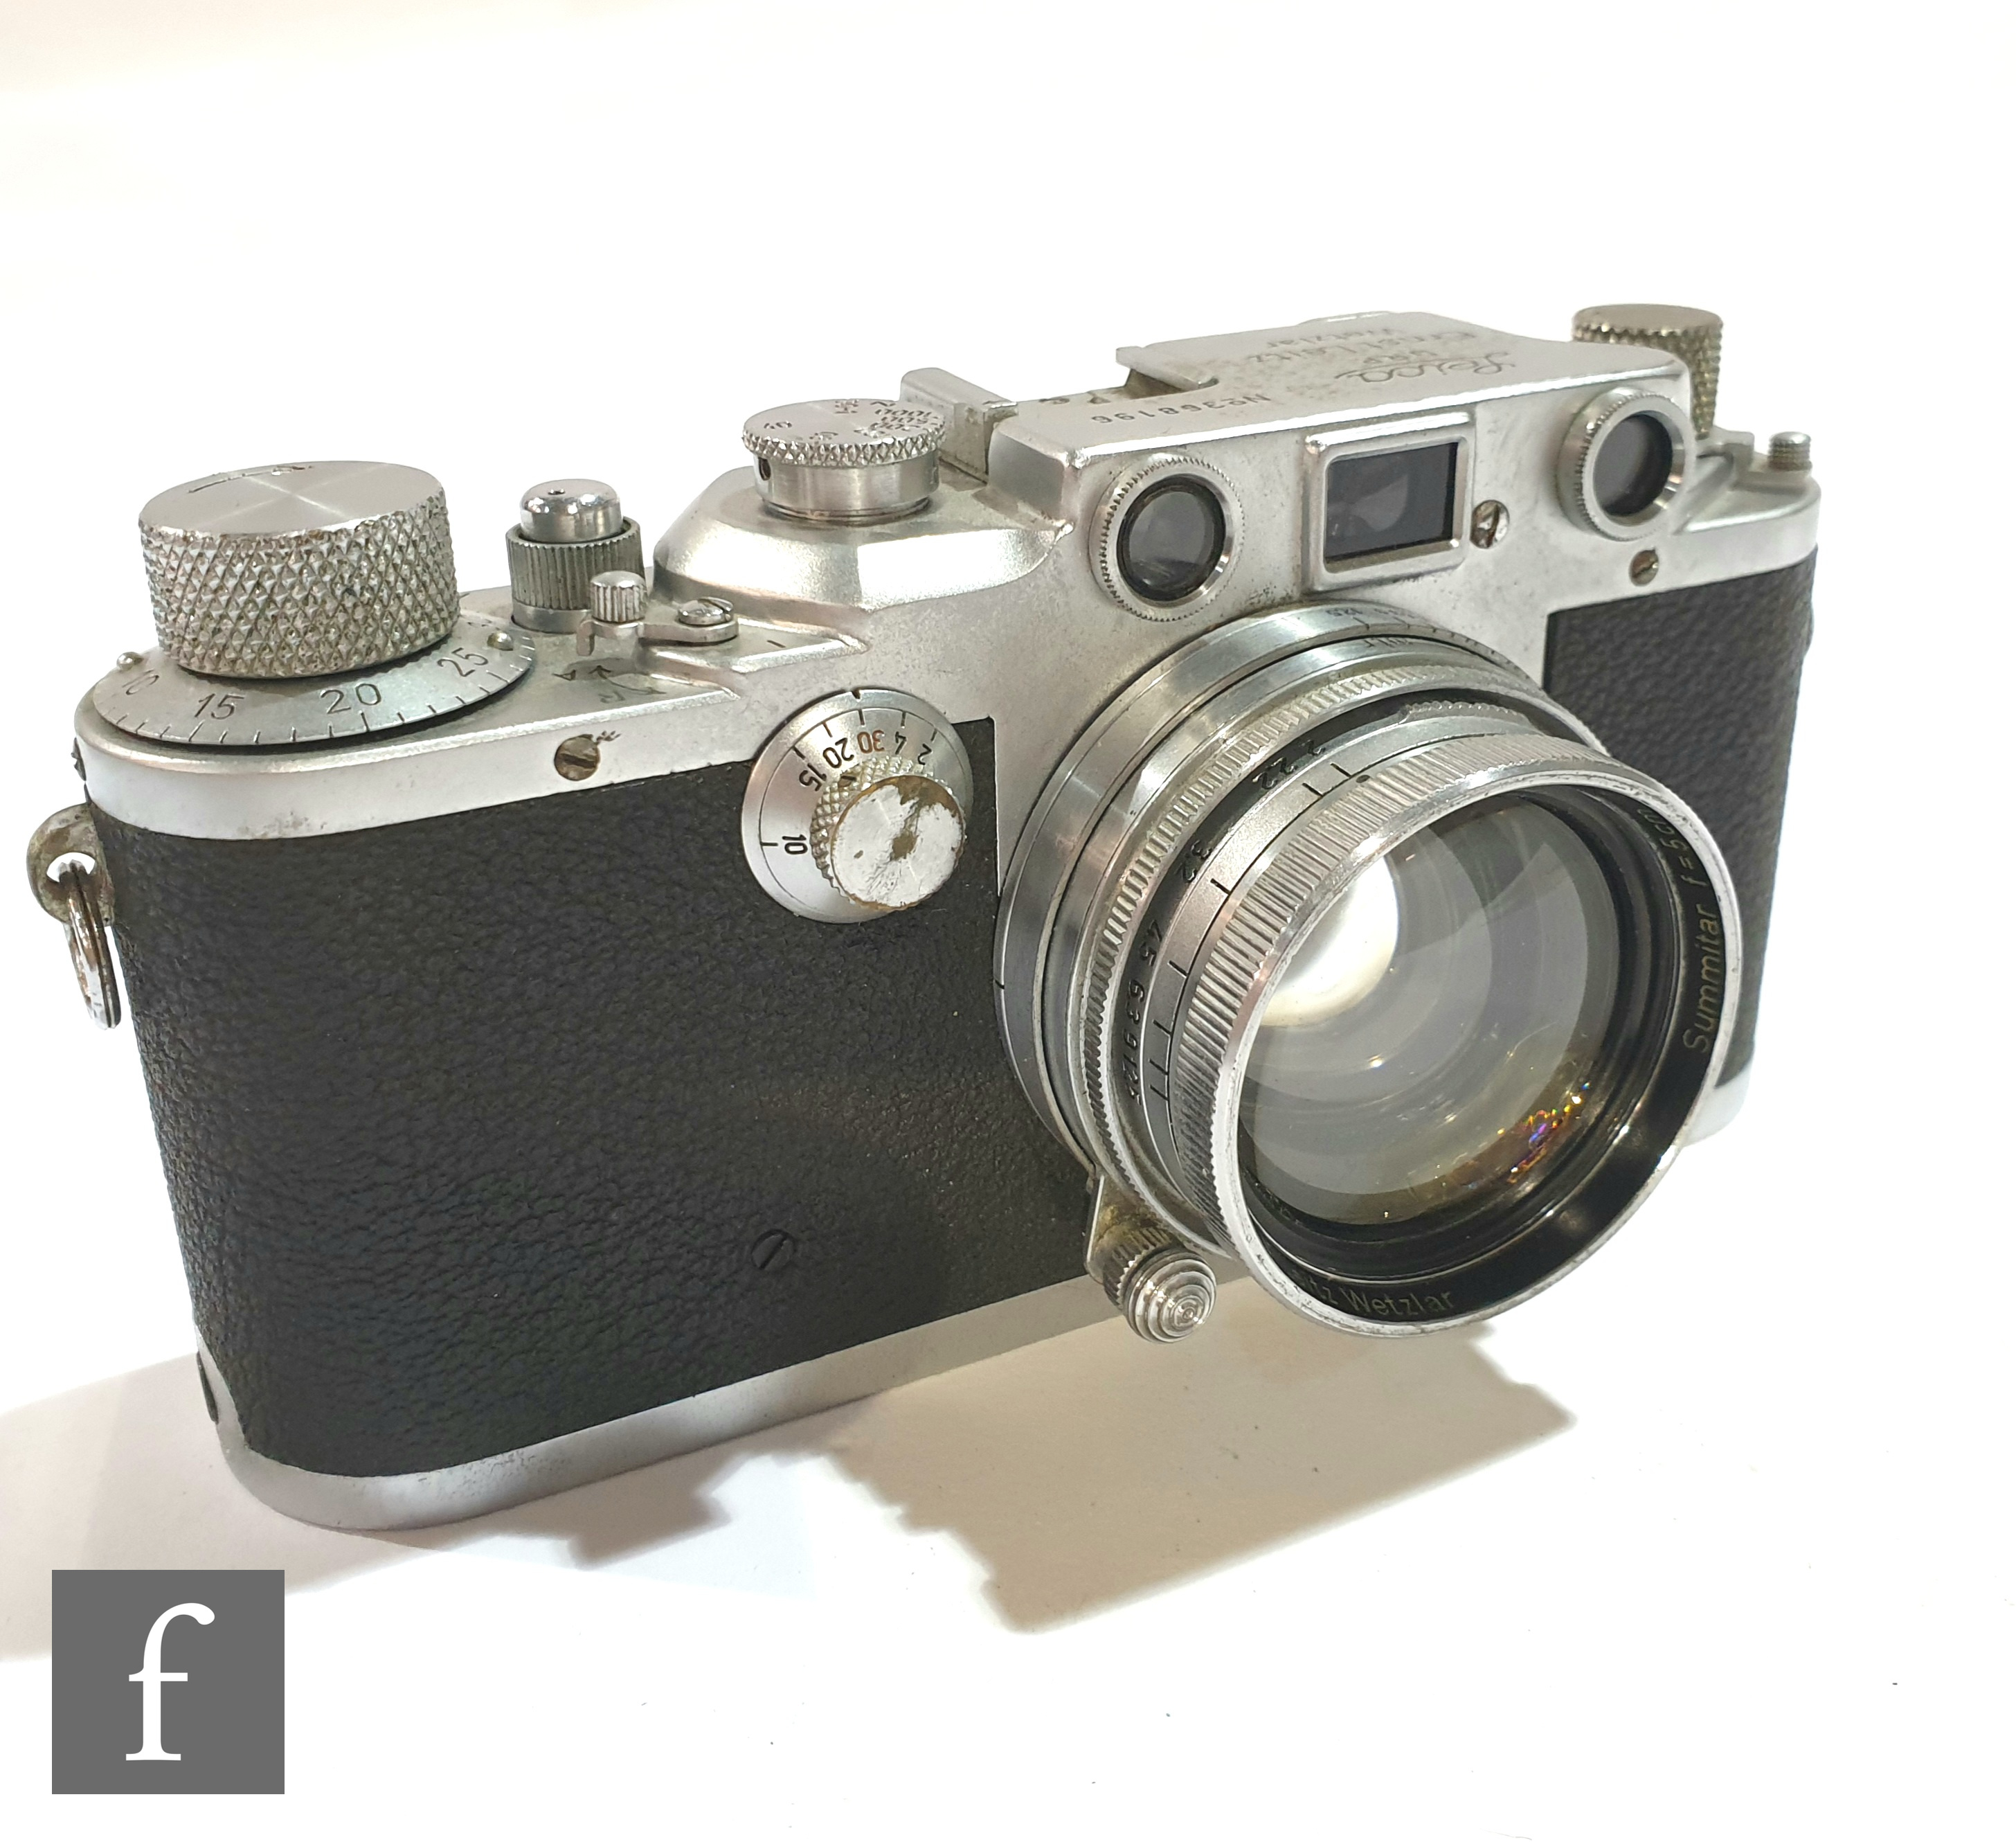 A Leica IIIC rangefinder camera, circa 1941, serial number 368196, Chrome body, with Ernst Leitz